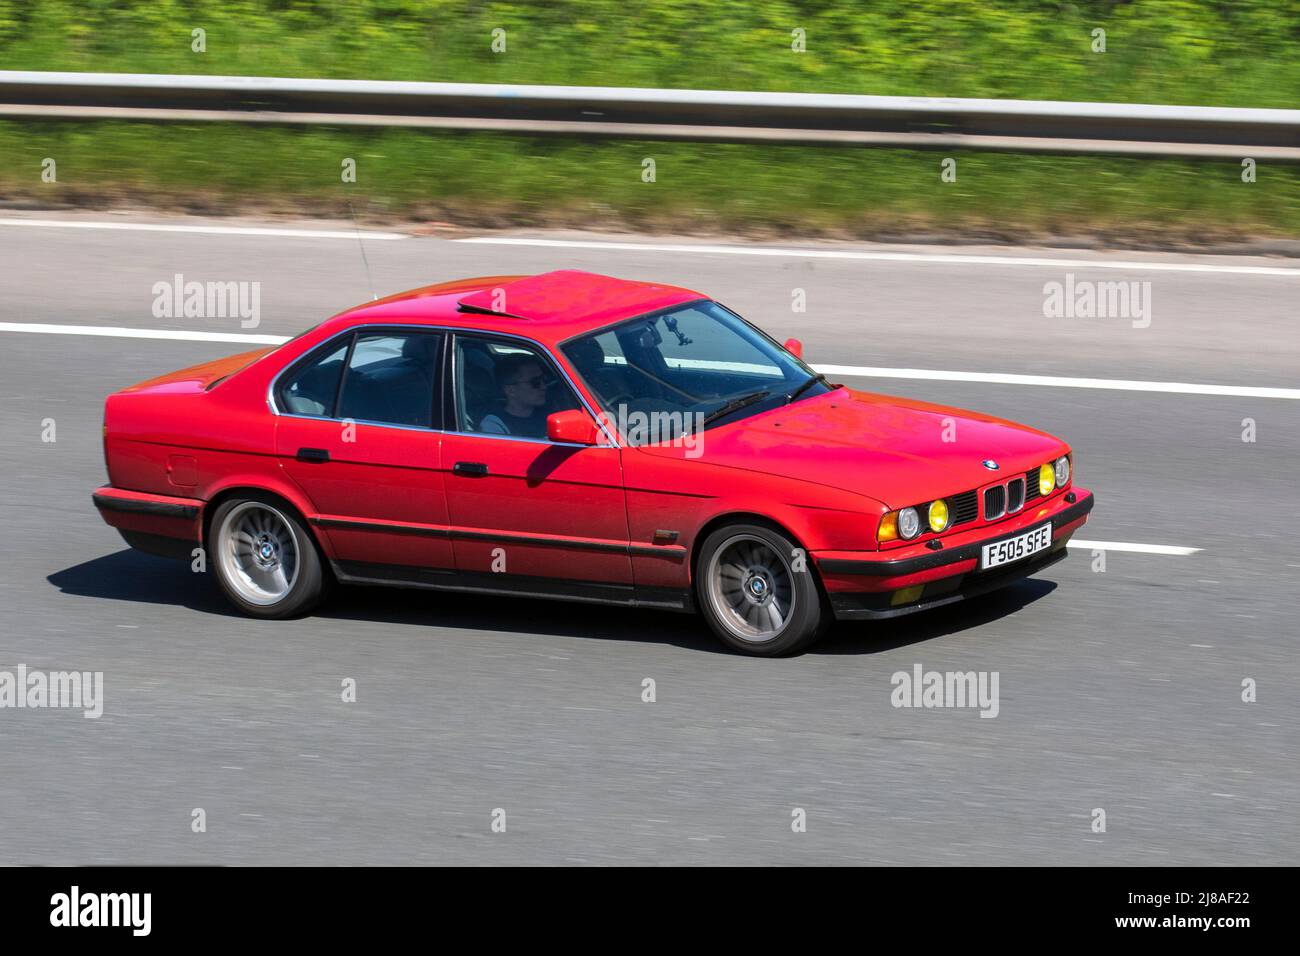 1989 80s eighties red BMW 535 i se 5351 3430cc petrol 4dr saloon Stock Photo